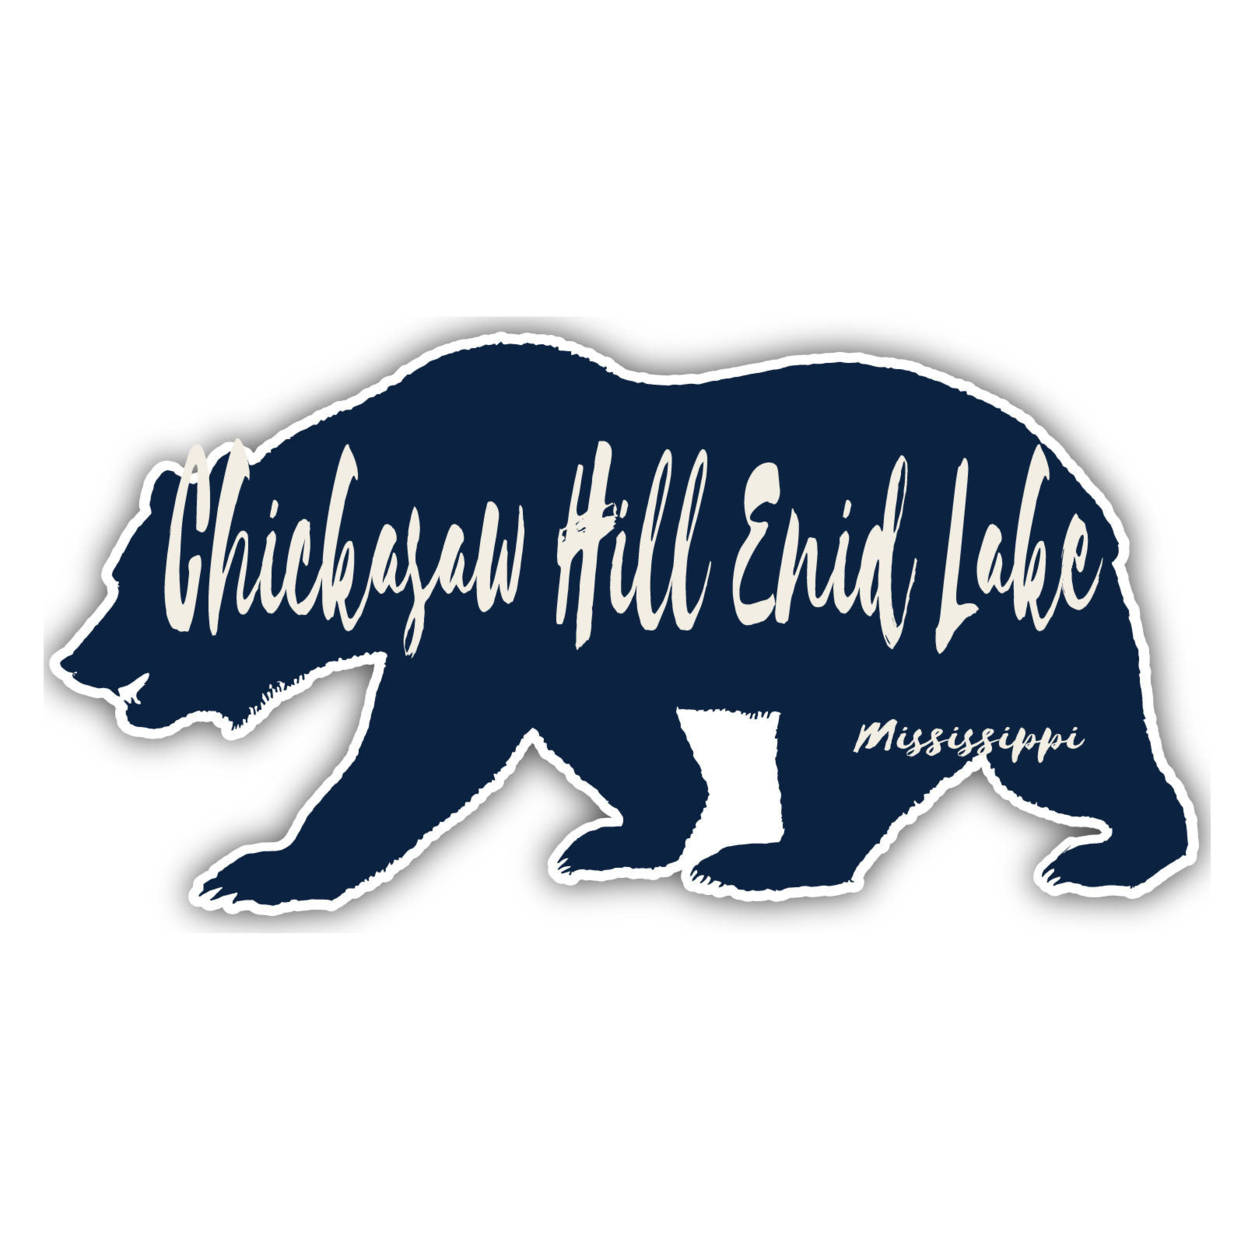 Chickasaw Hill Enid Lake Mississippi Souvenir Decorative Stickers (Choose Theme And Size) - 4-Pack, 2-Inch, Bear